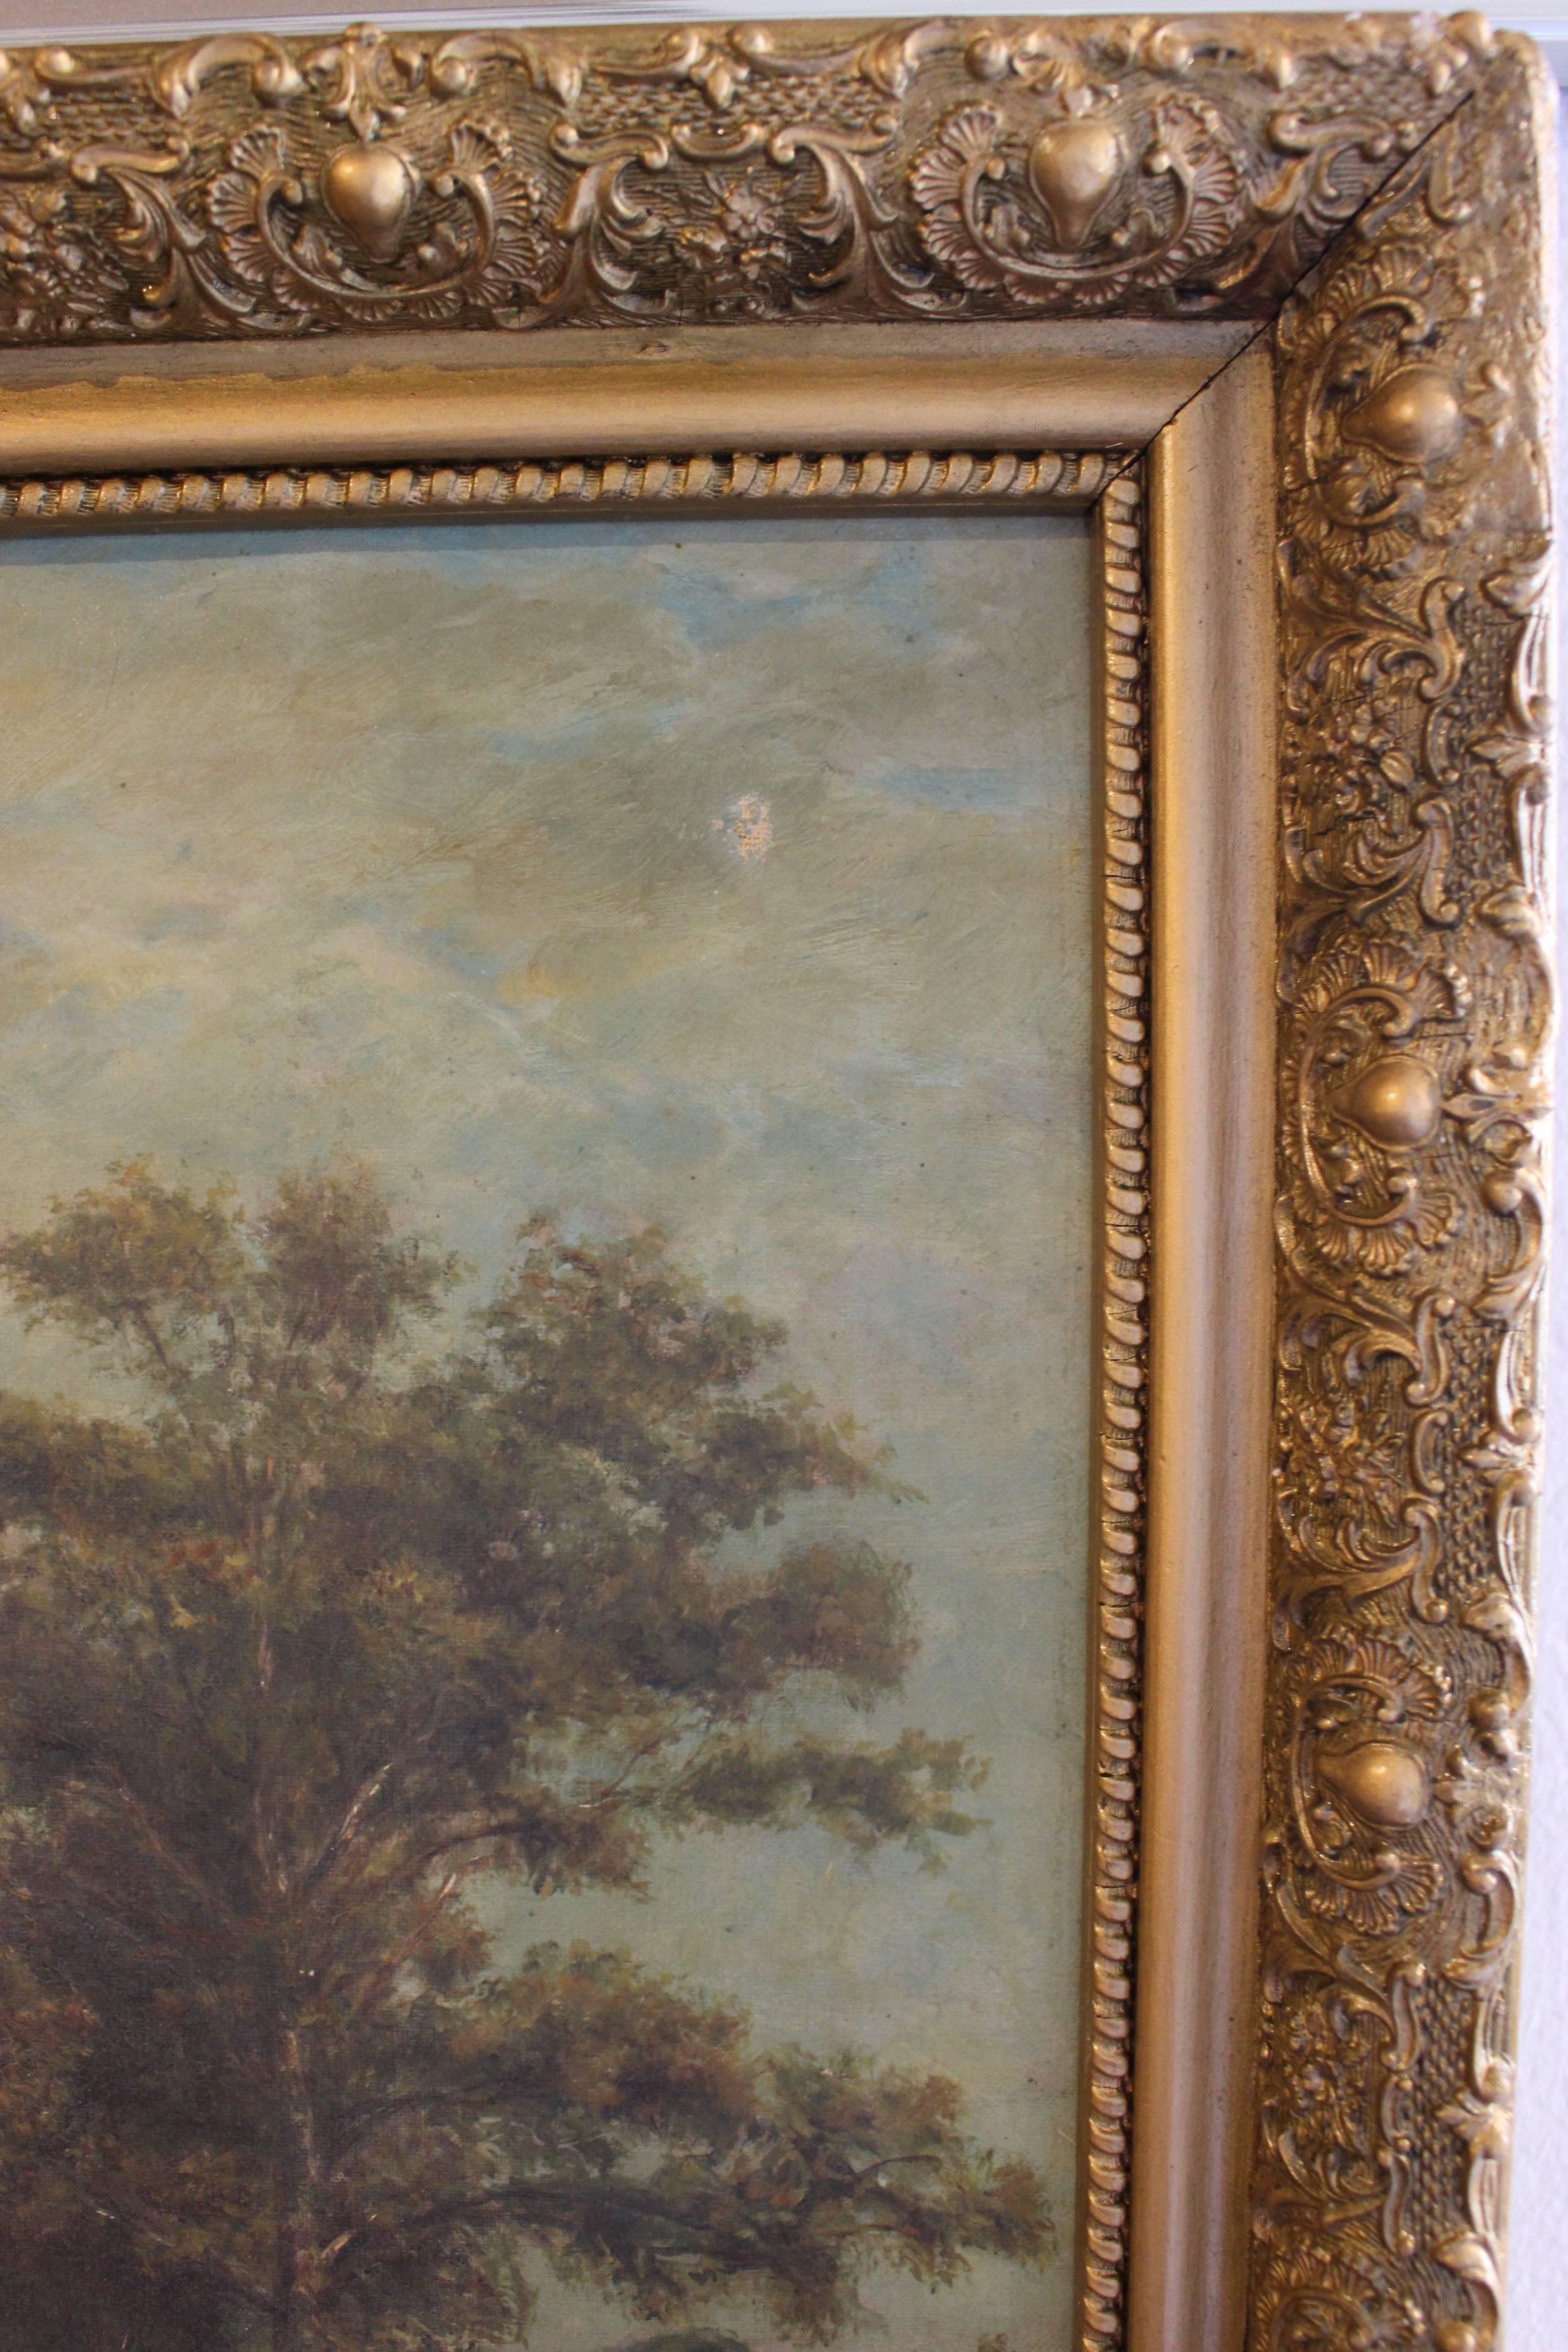 Pastoral painting of a meadow with trees in later frame.